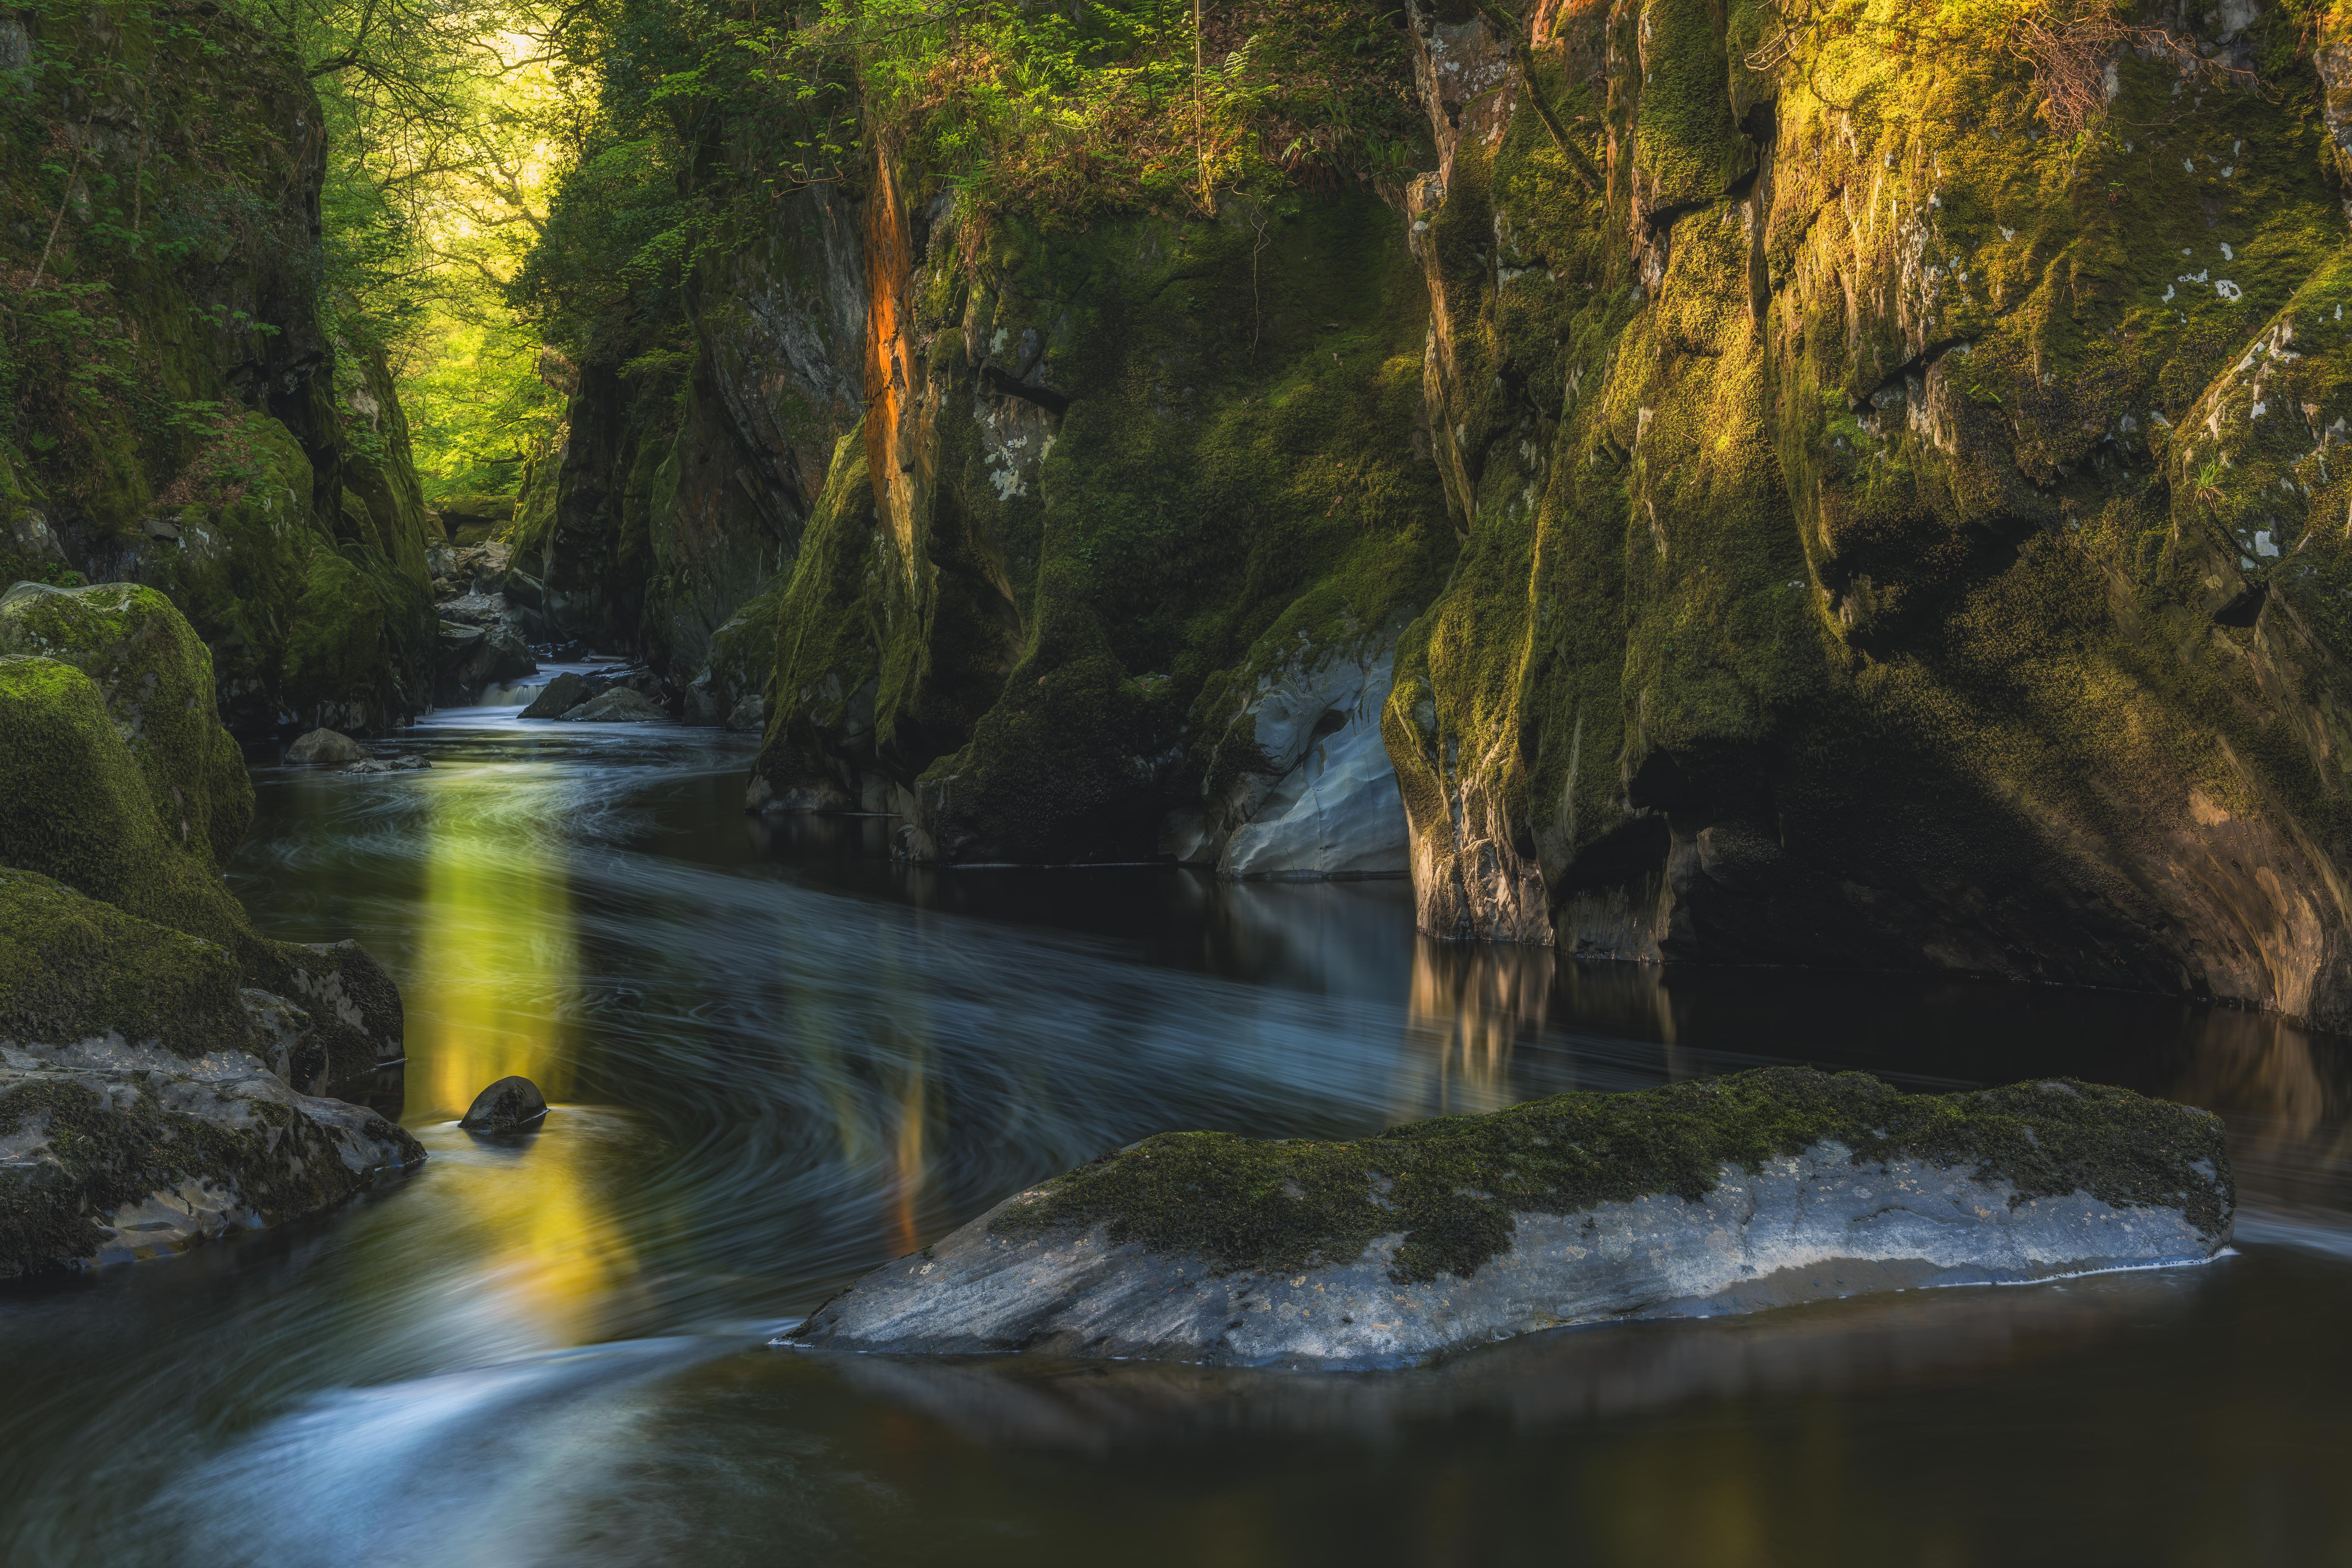 General 6300x4200 river long exposure Wales UK nature forest moss cliff rocks trees